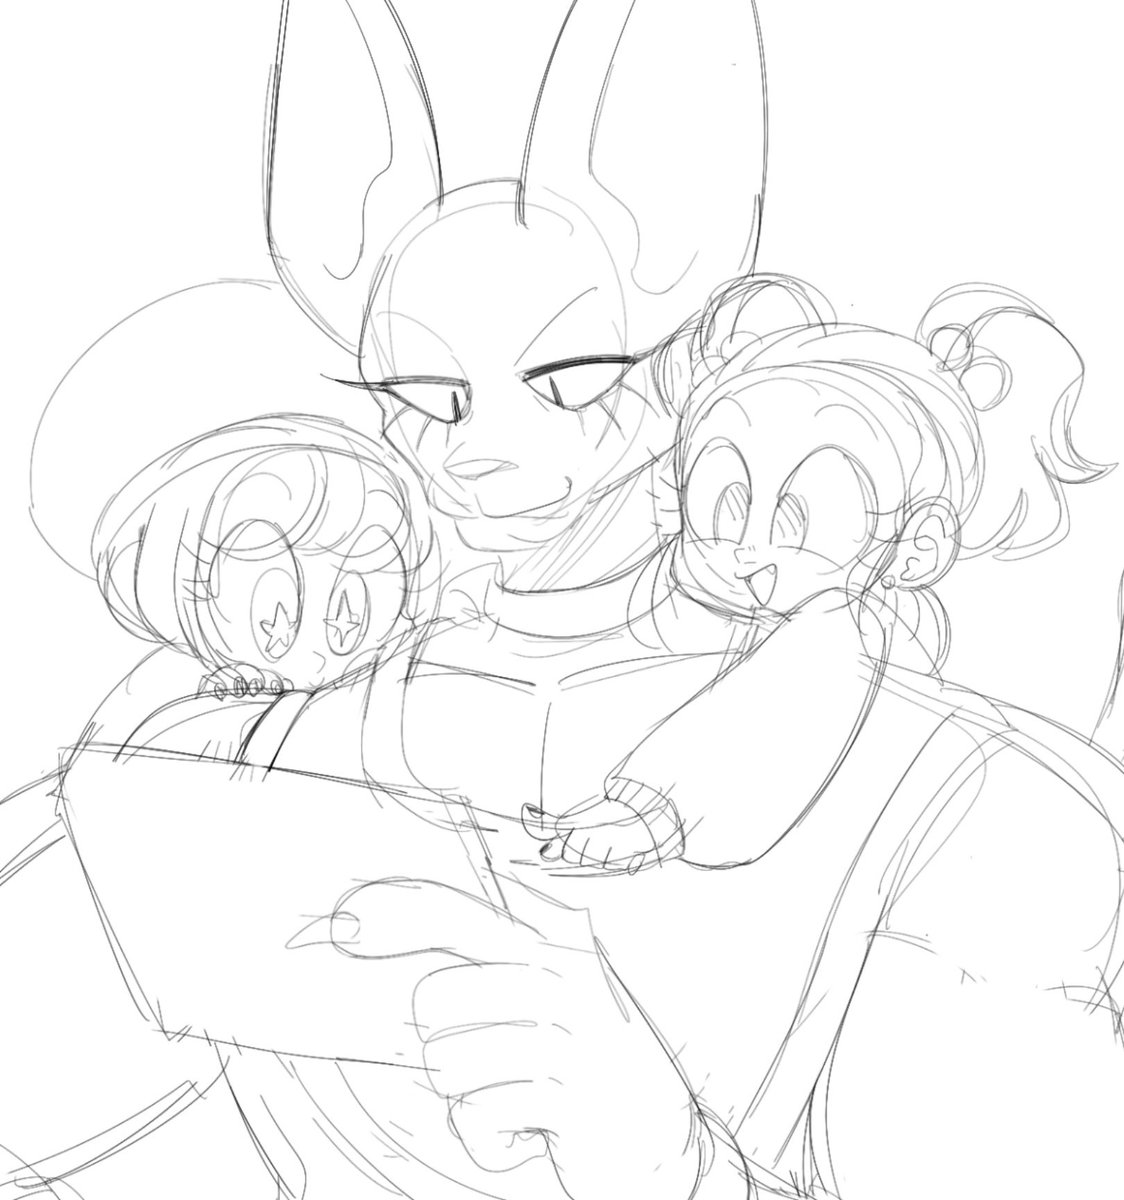 Wips of Pan and Bra with their uncle Piccolo and Beerus 